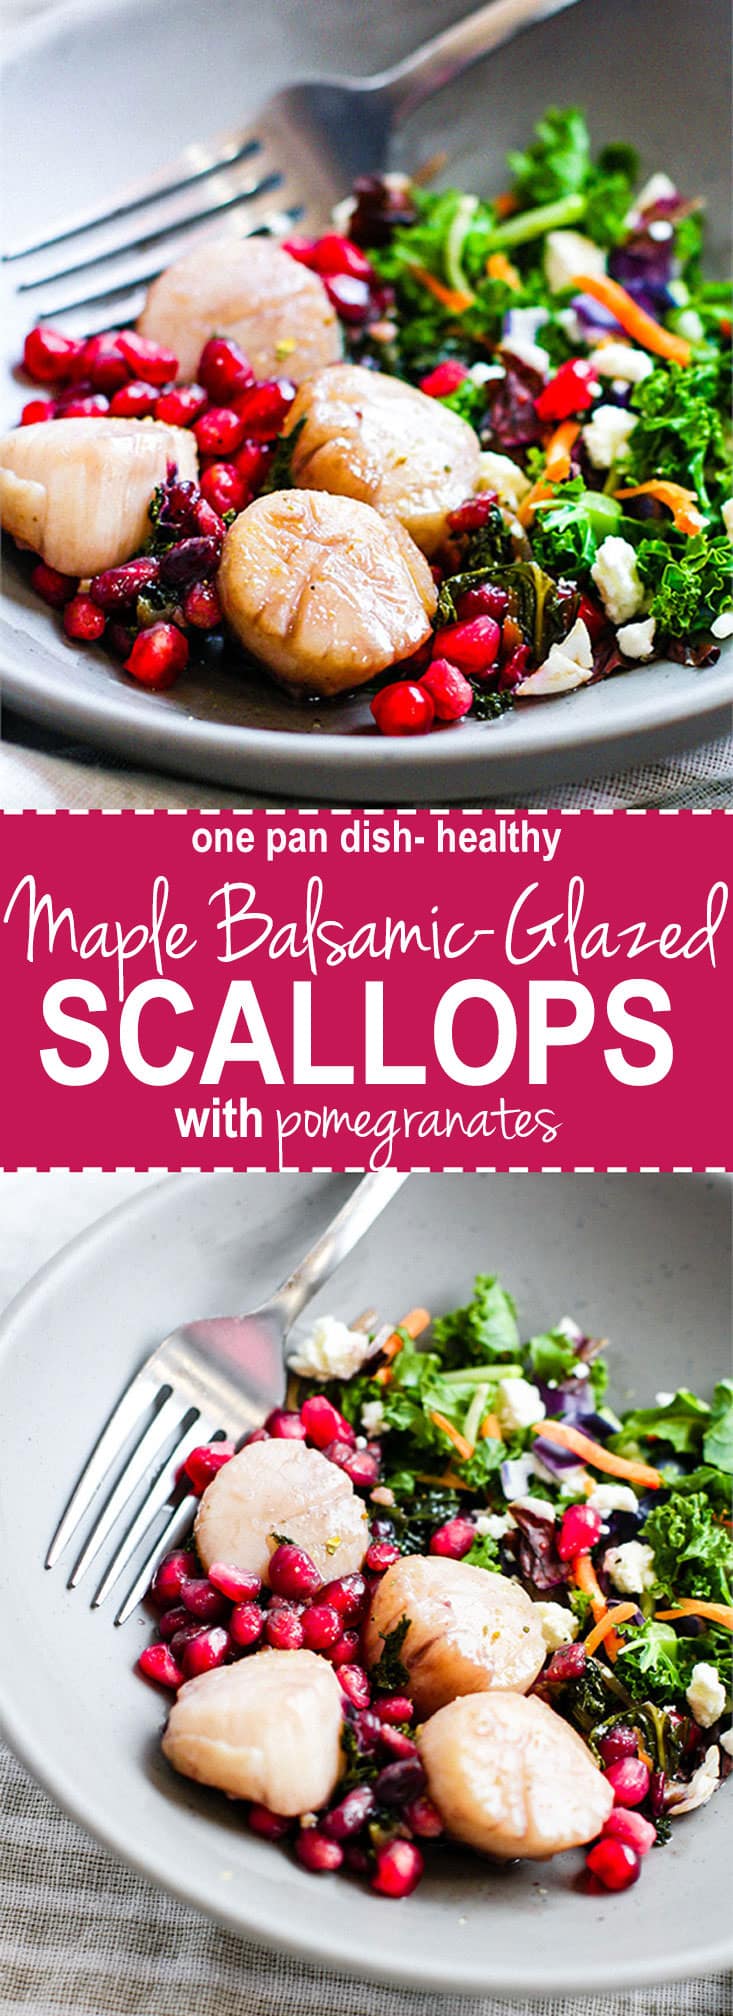 EASY Maple Balsamic-Glazed Scallop Recipe with Pomegranates! All you need is one pan and 10 minutes. A Healthy Maple Balsamic-Glazed Scallops recipe so perfect for a date night in or to impress guests. Fake your way FANCY with this recipe! They are that good and simple! Paleo friendly of course.